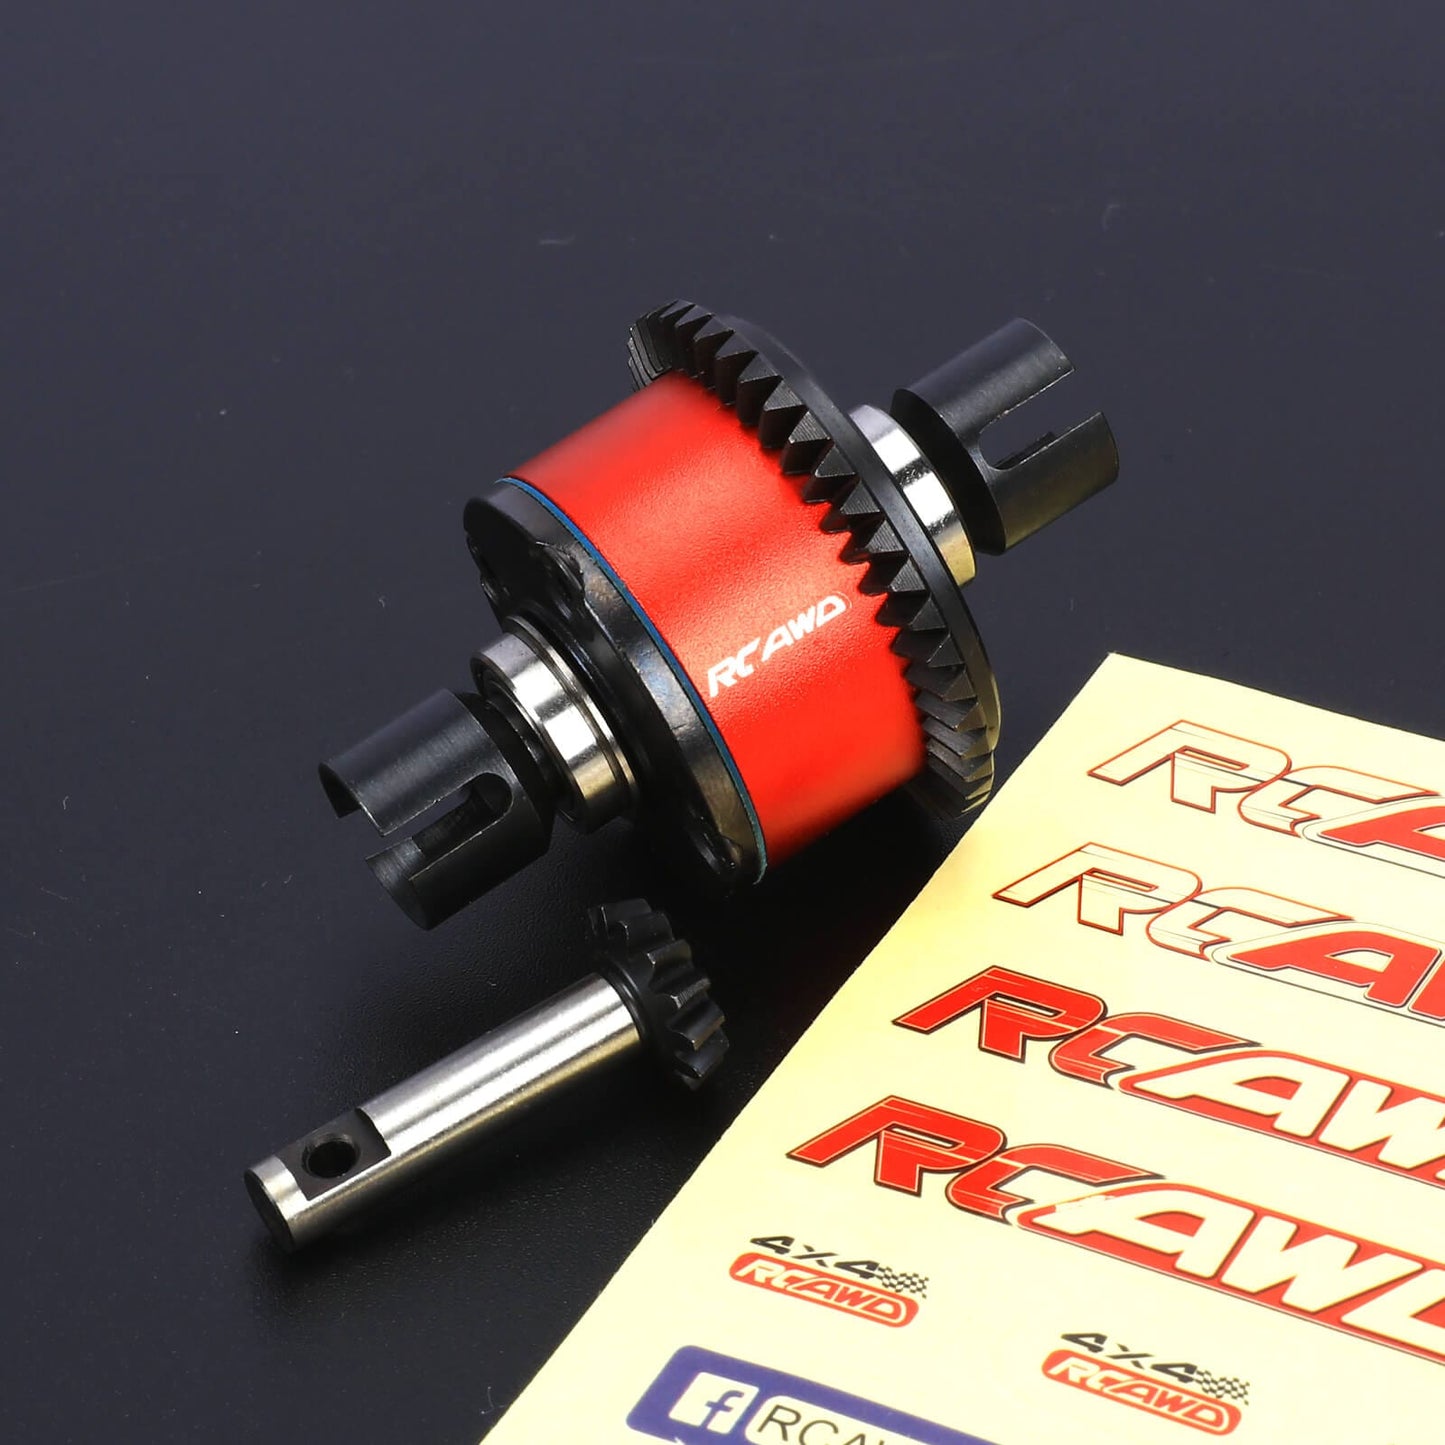 RCAWD ARRMA 6S RCAWD Losi LMT Upgrades Complete F/R 43T Differential Set with 13T Input gear